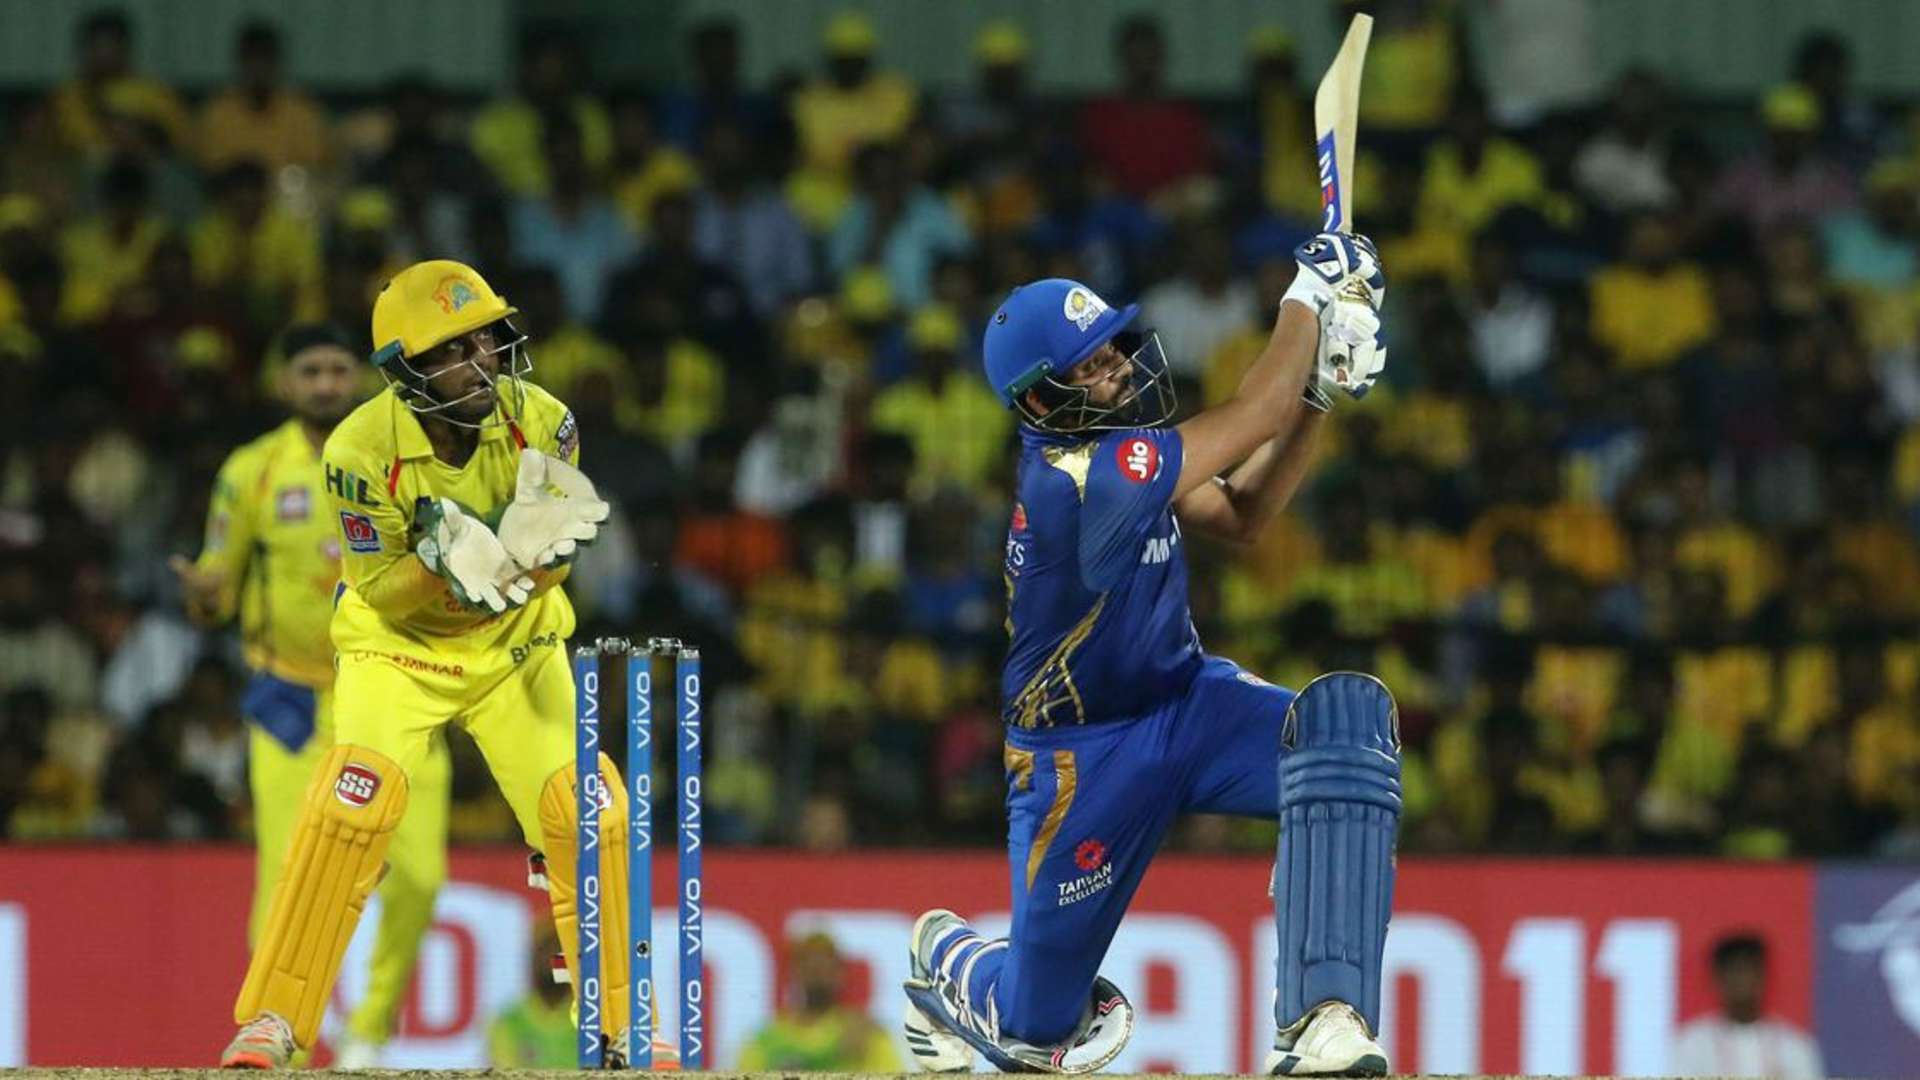 Rohit Sharma plays a shot, Image credit: Twitter